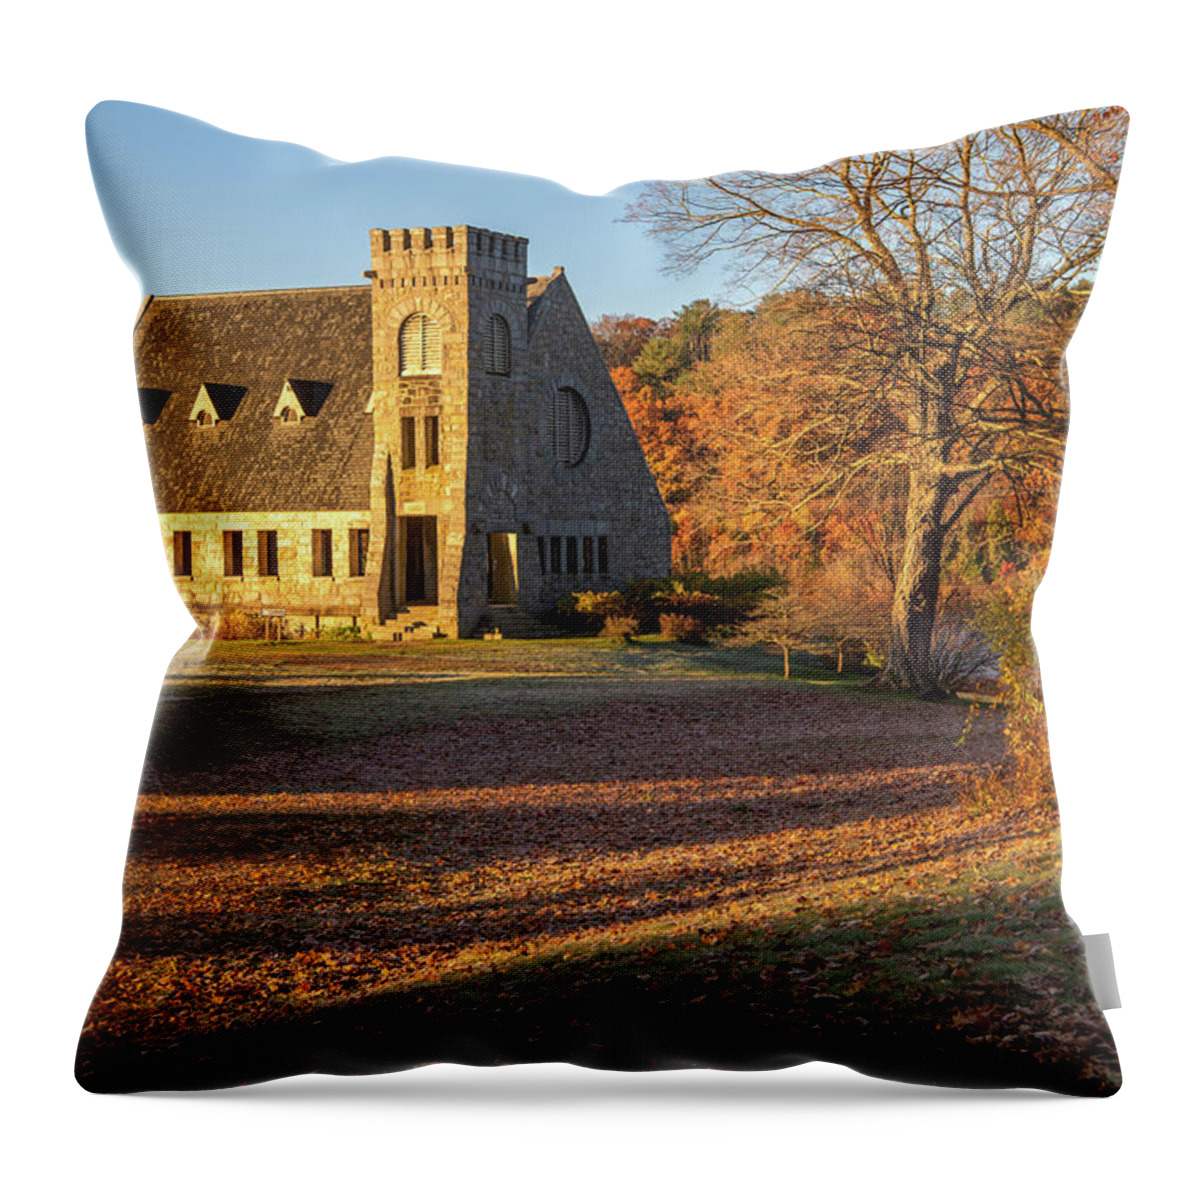 Old Stone Church Throw Pillow featuring the photograph Old Stone Church Autumn Morning by Michael Saunders